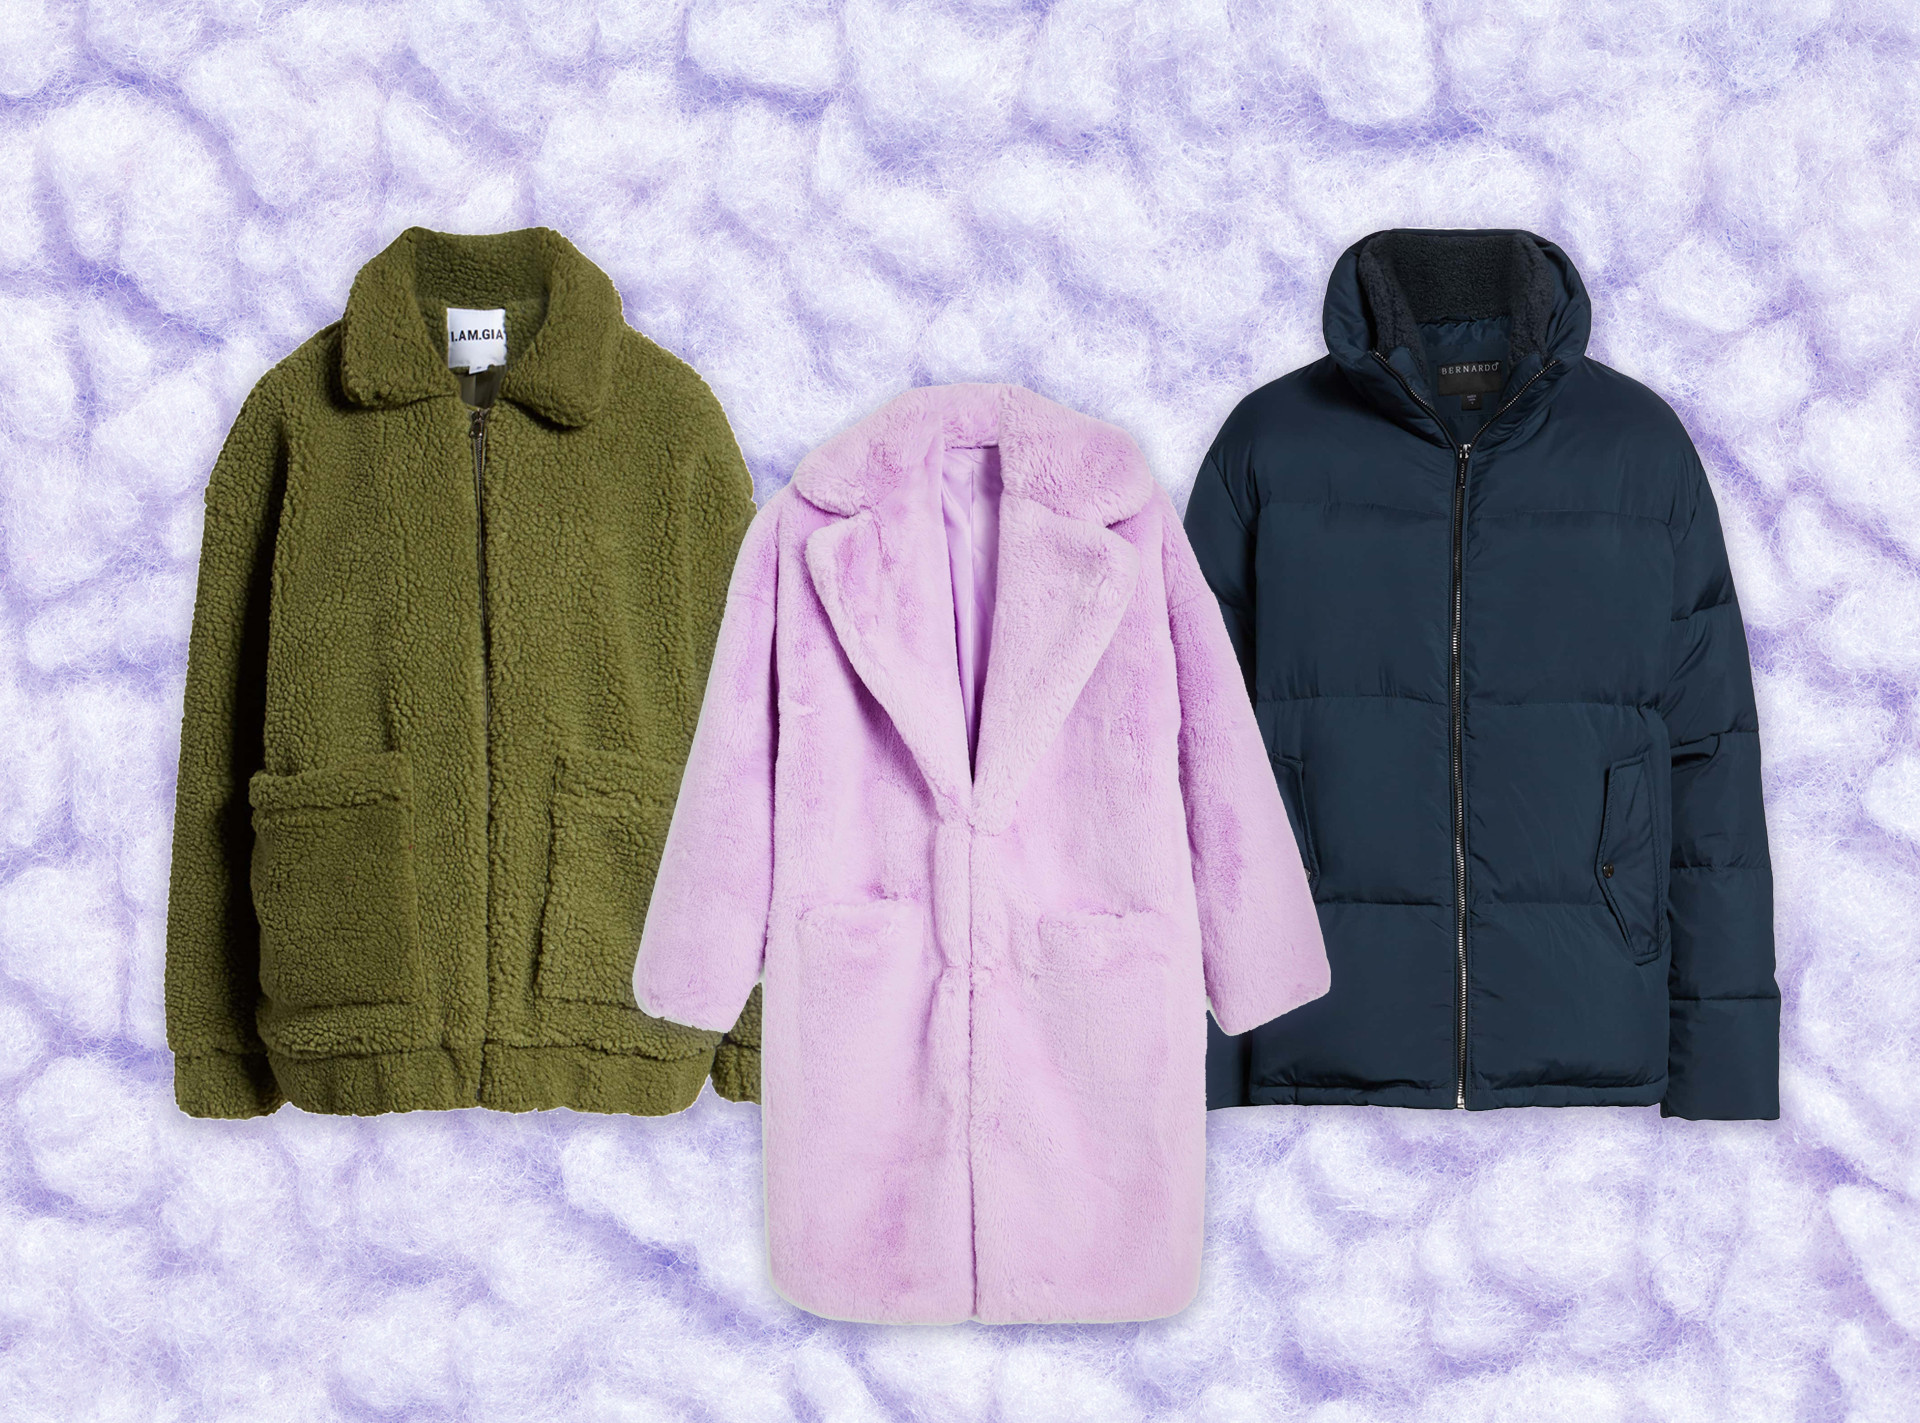 E-Comm: Oversized Jackets for the It Girl 